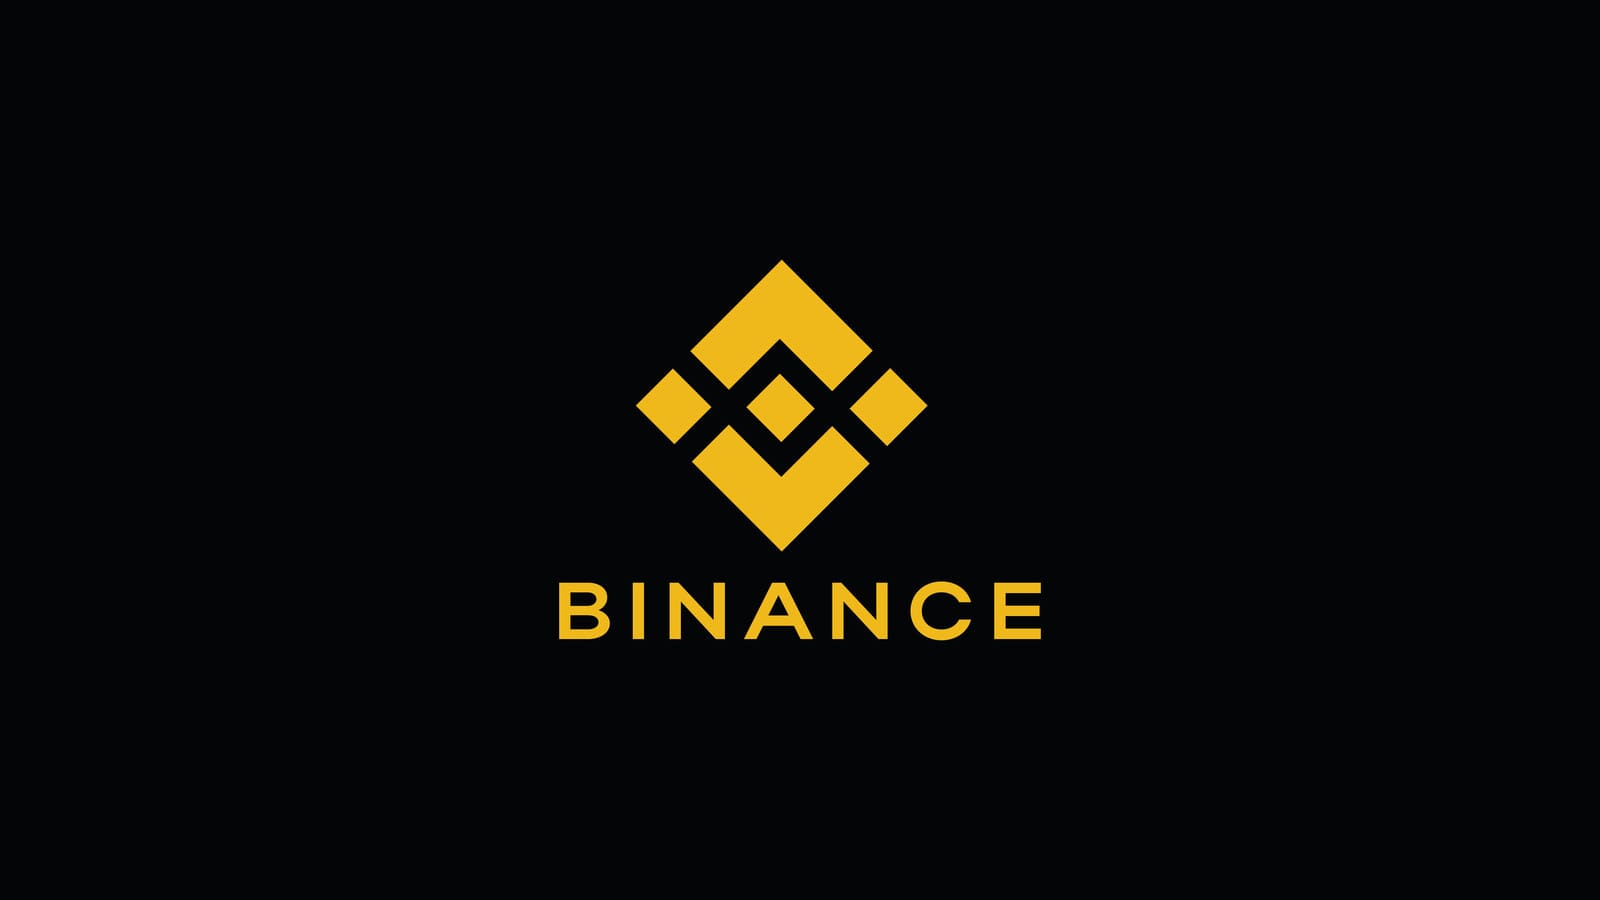 Binance Becomes Official Partner of the 64th Grammy Awards